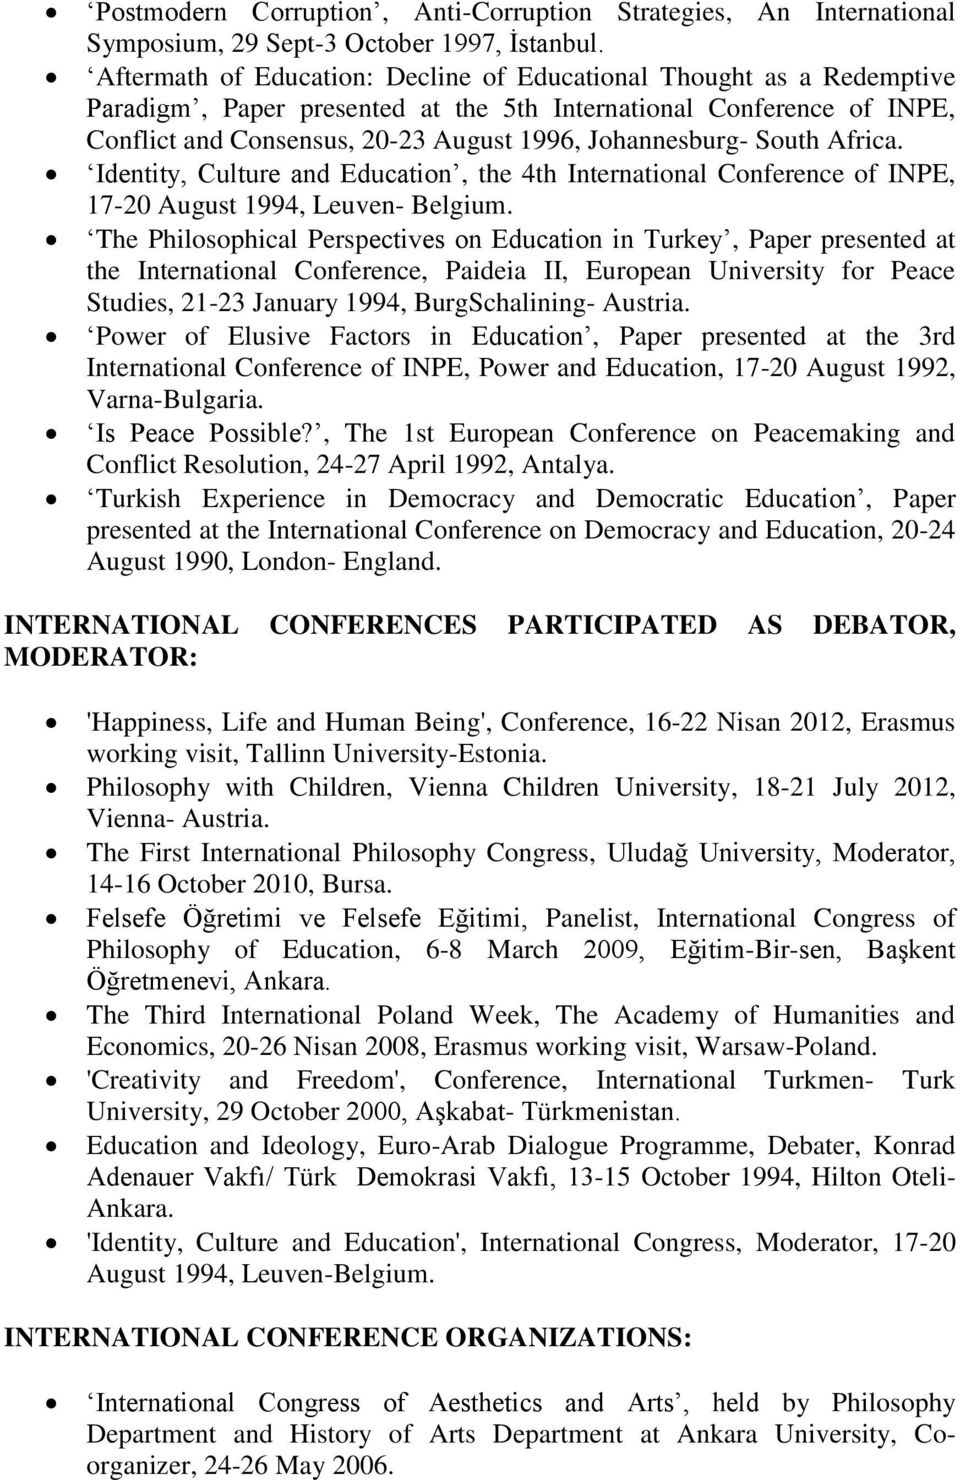 South Africa. Identity, Culture and Education, the 4th International Conference of INPE, 17-20 August 1994, Leuven- Belgium.